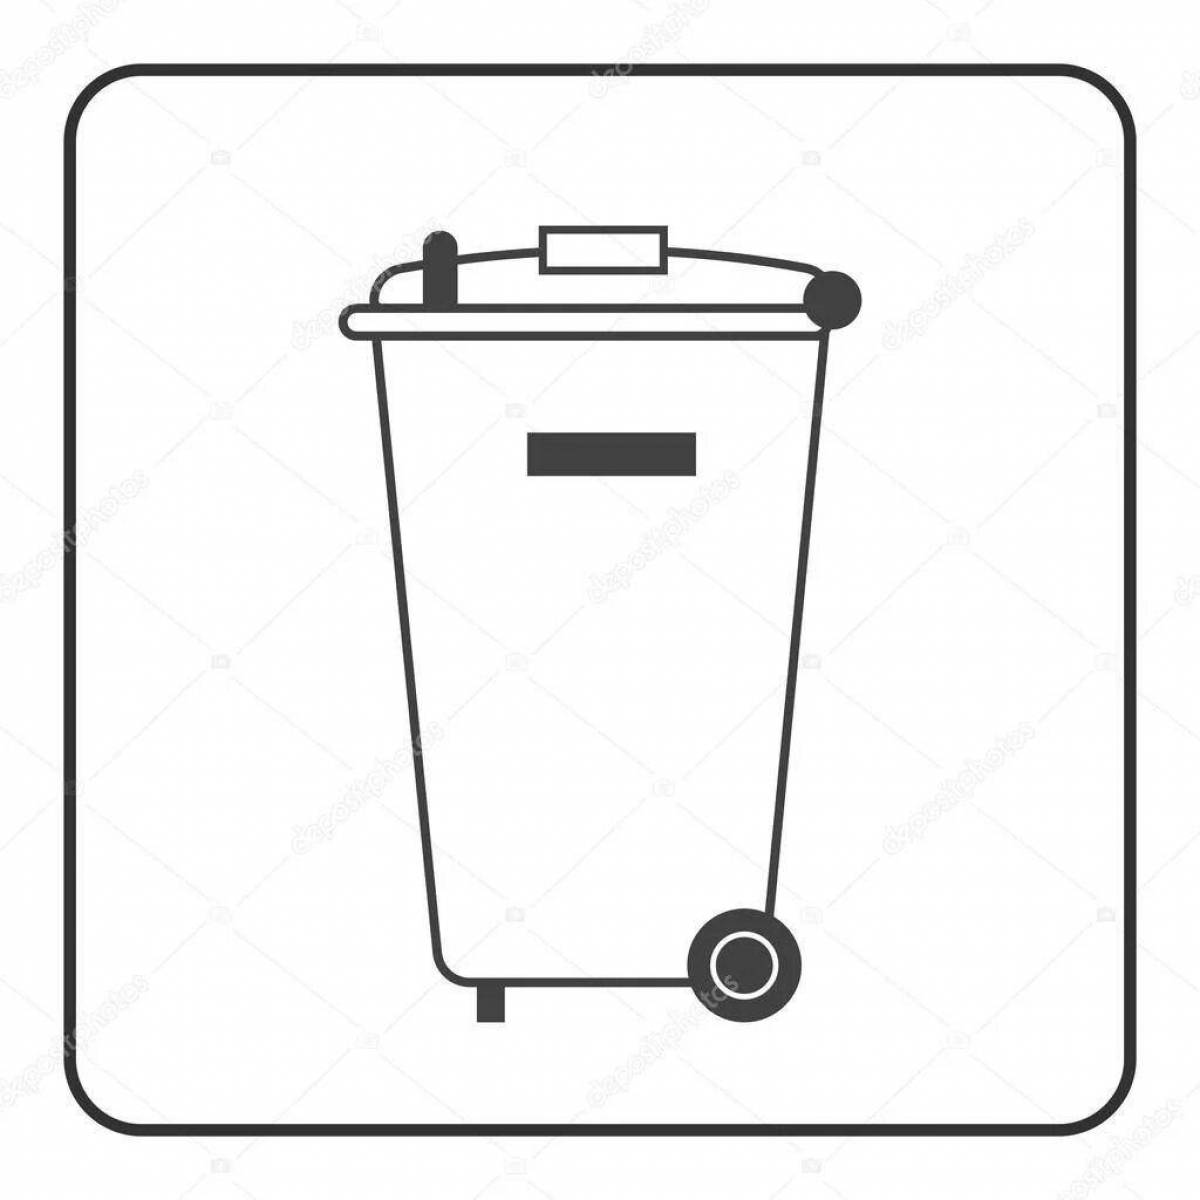 Bright trash can coloring page